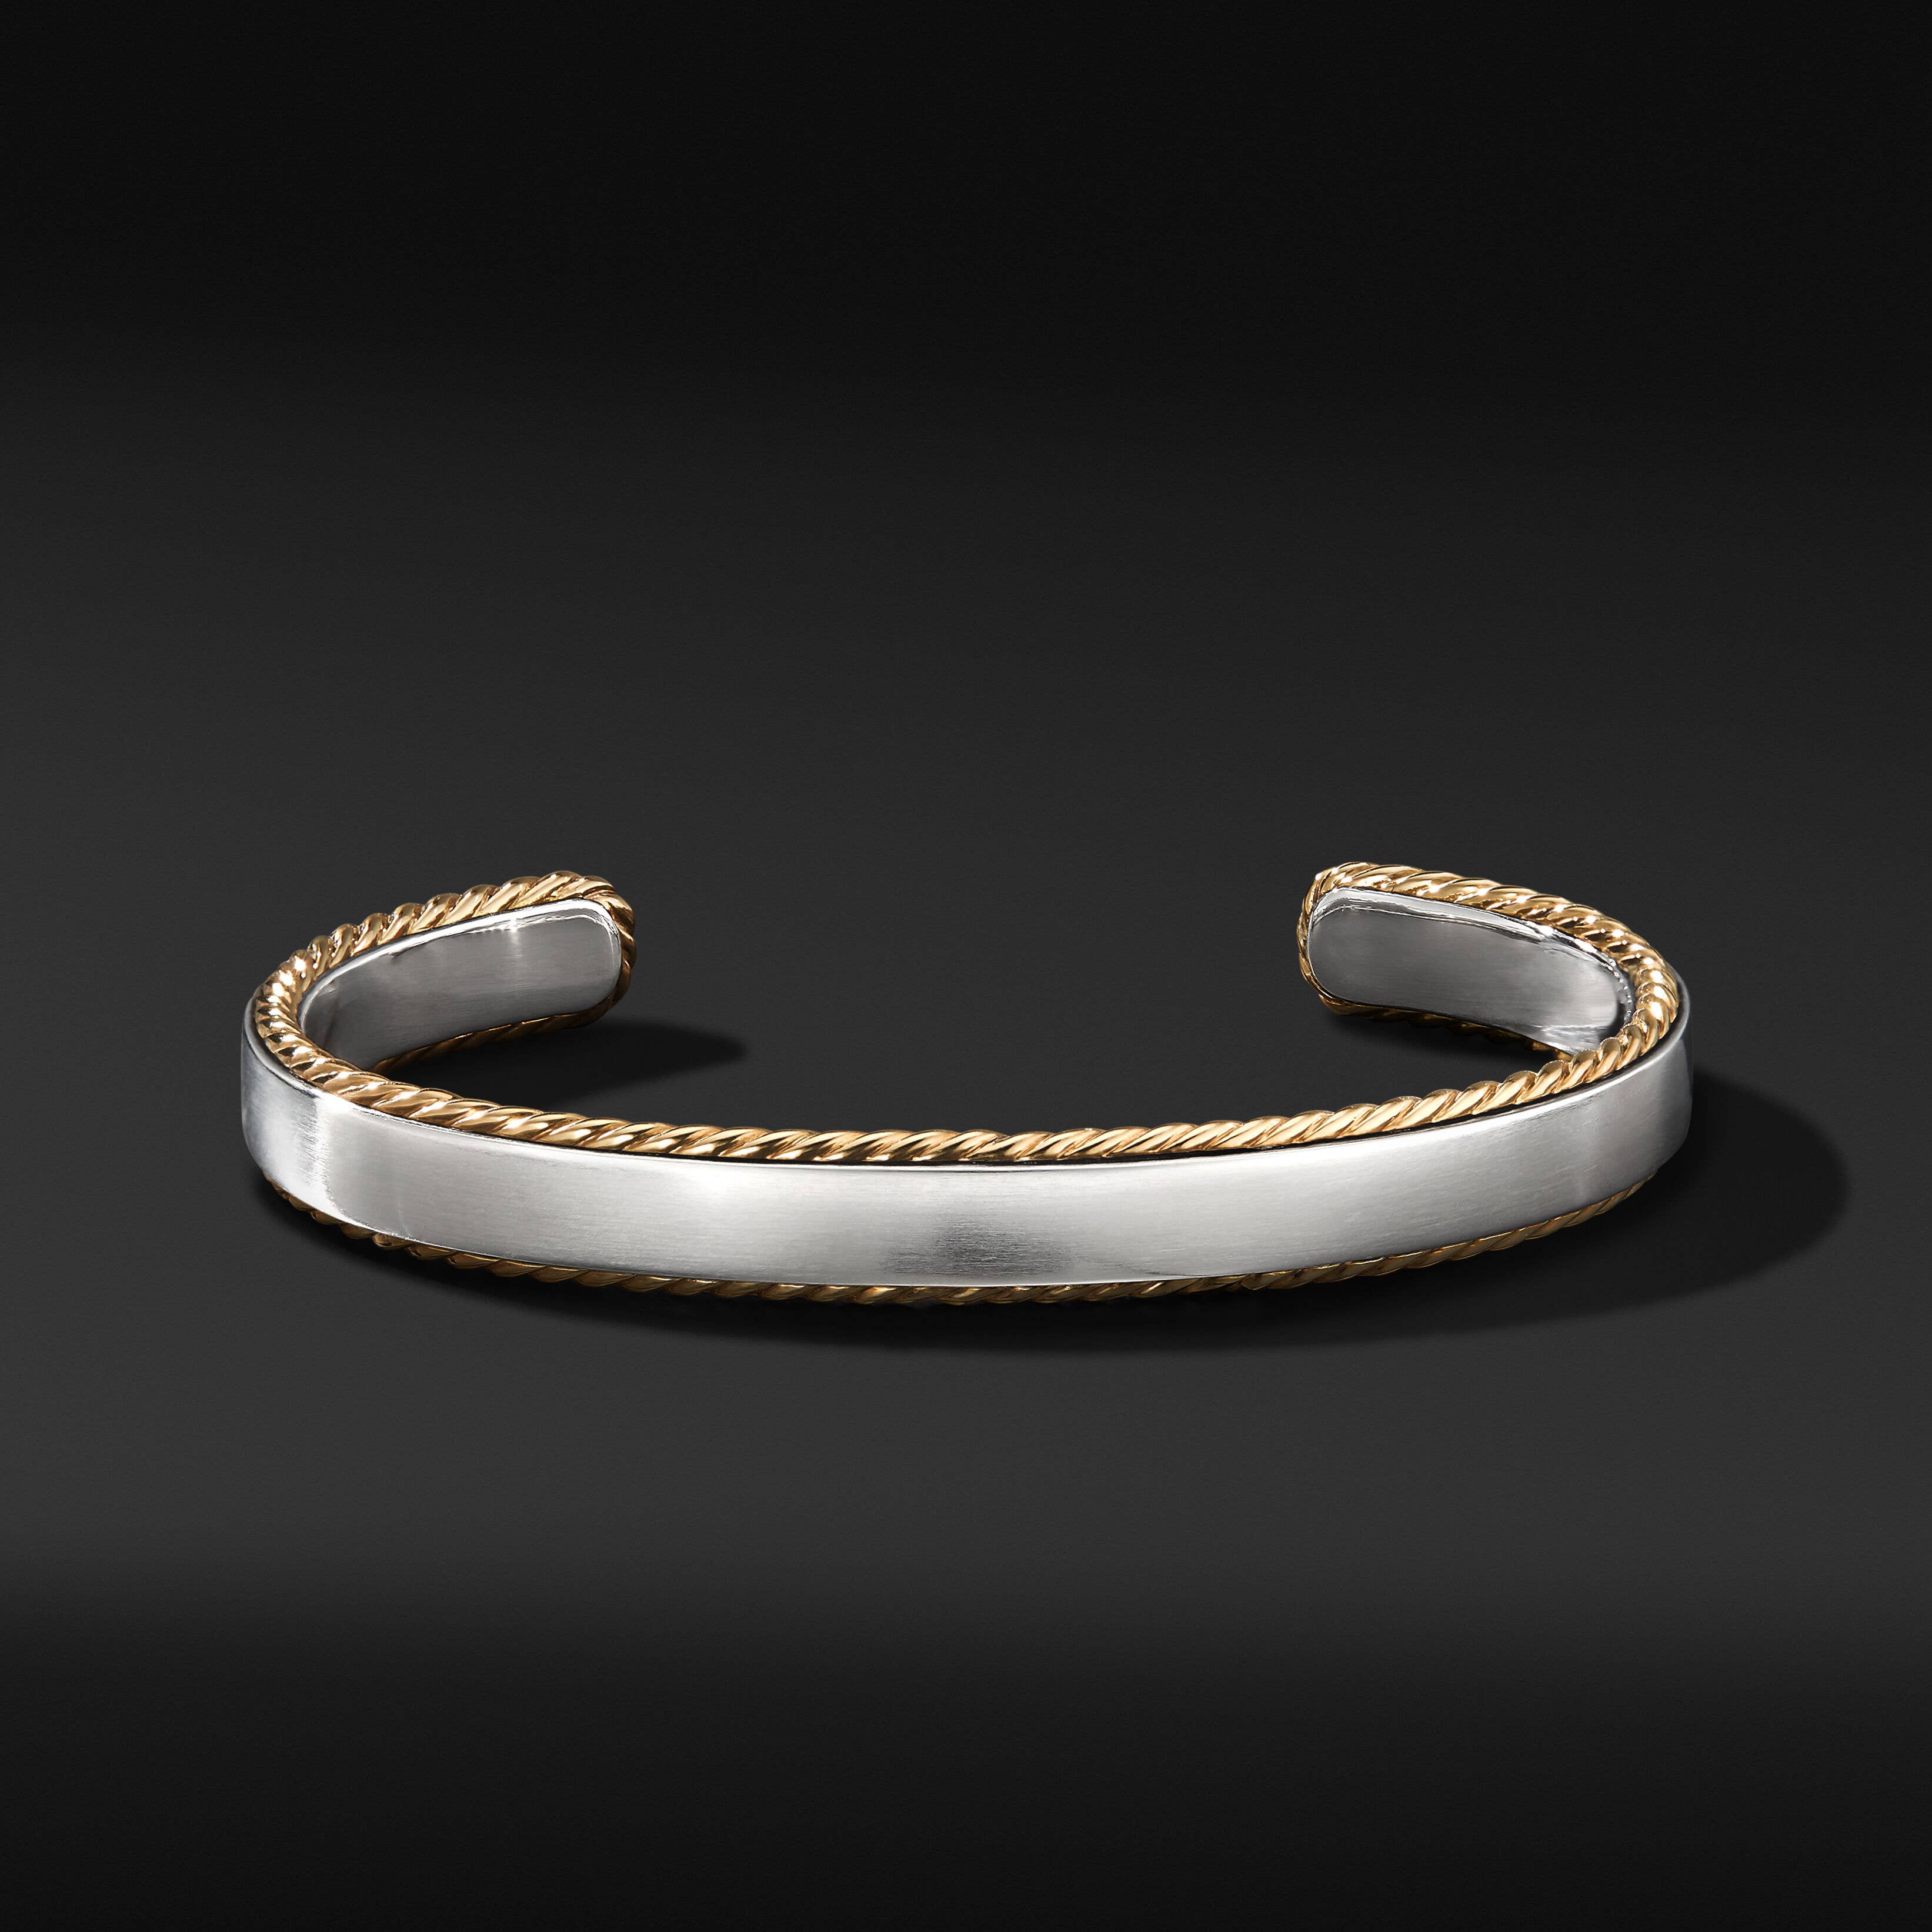 Streamline® Cable Cuff Bracelet with 18K Yellow Gold